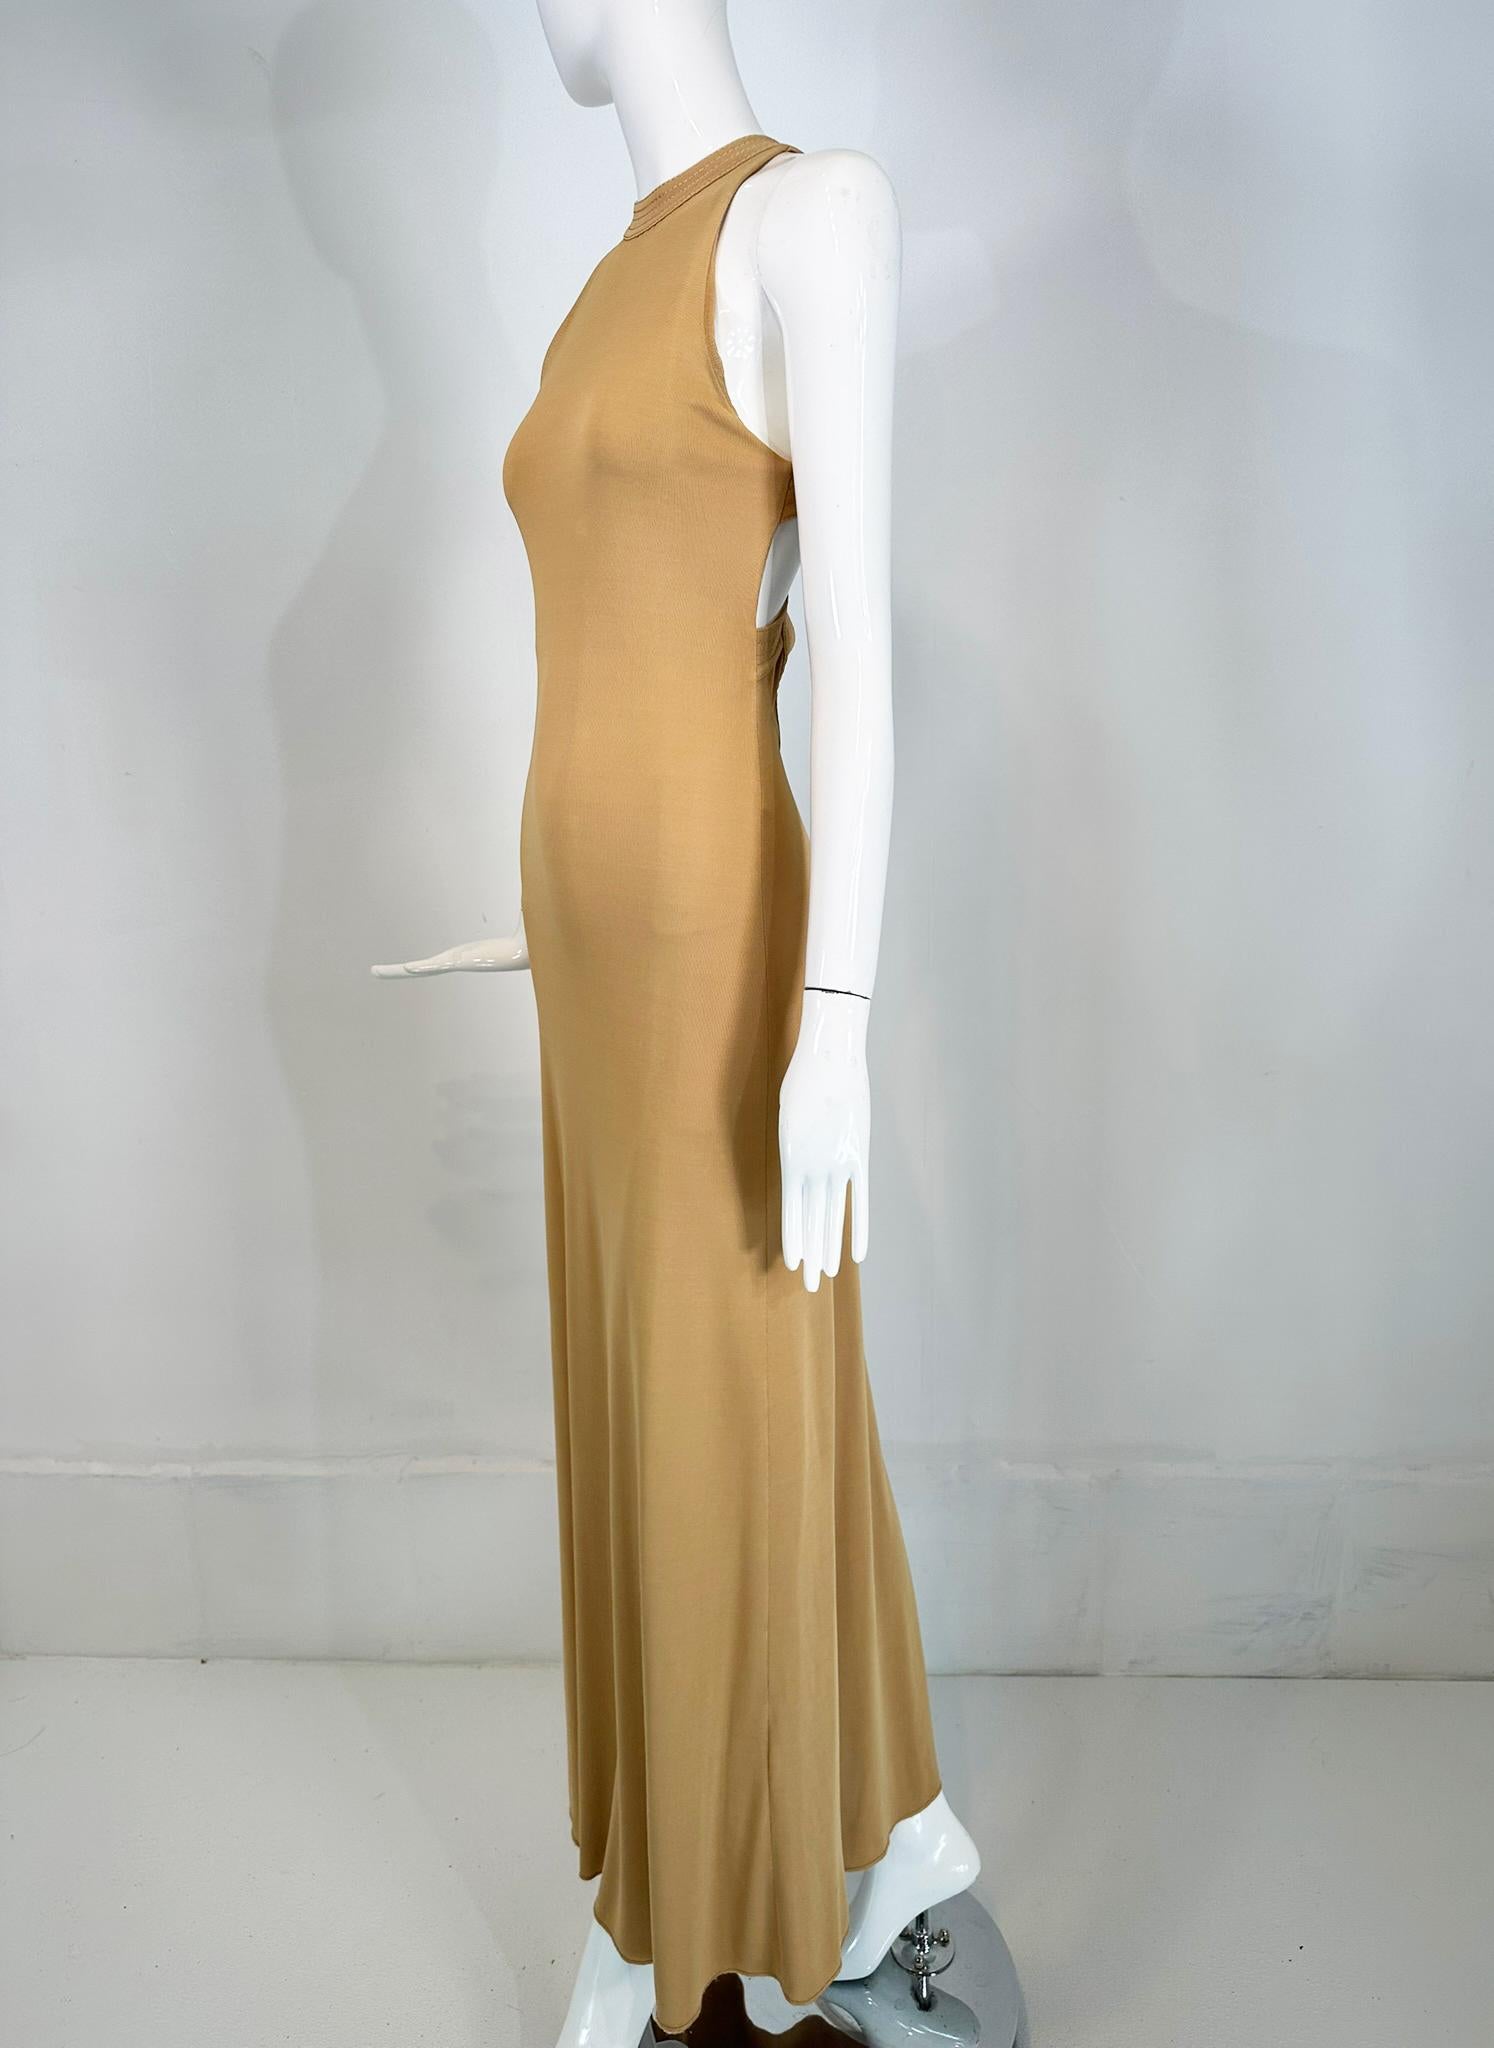 Giorgio Armani Beige Jersey Halter Neck Strap Back Evening Dress  In Good Condition For Sale In West Palm Beach, FL